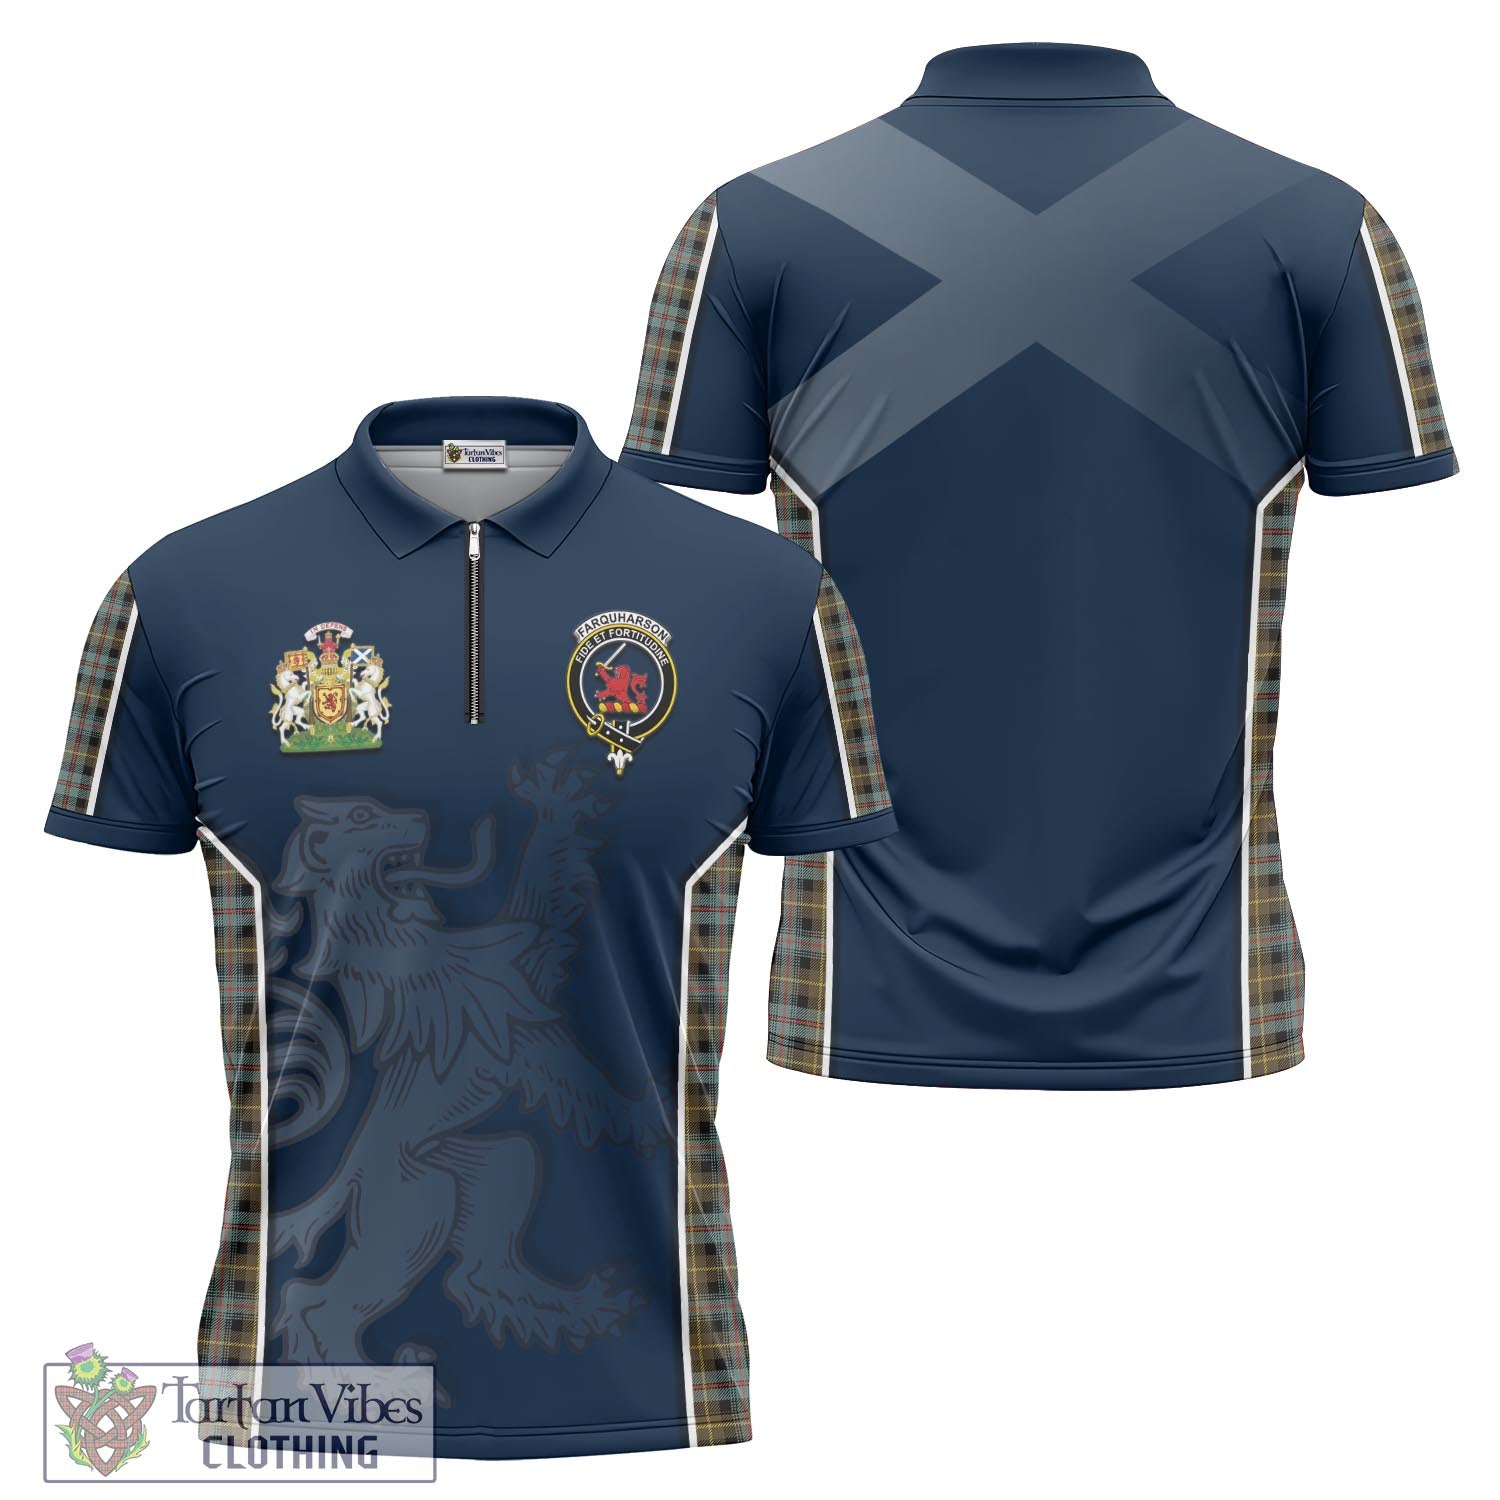 Tartan Vibes Clothing Farquharson Weathered Tartan Zipper Polo Shirt with Family Crest and Lion Rampant Vibes Sport Style